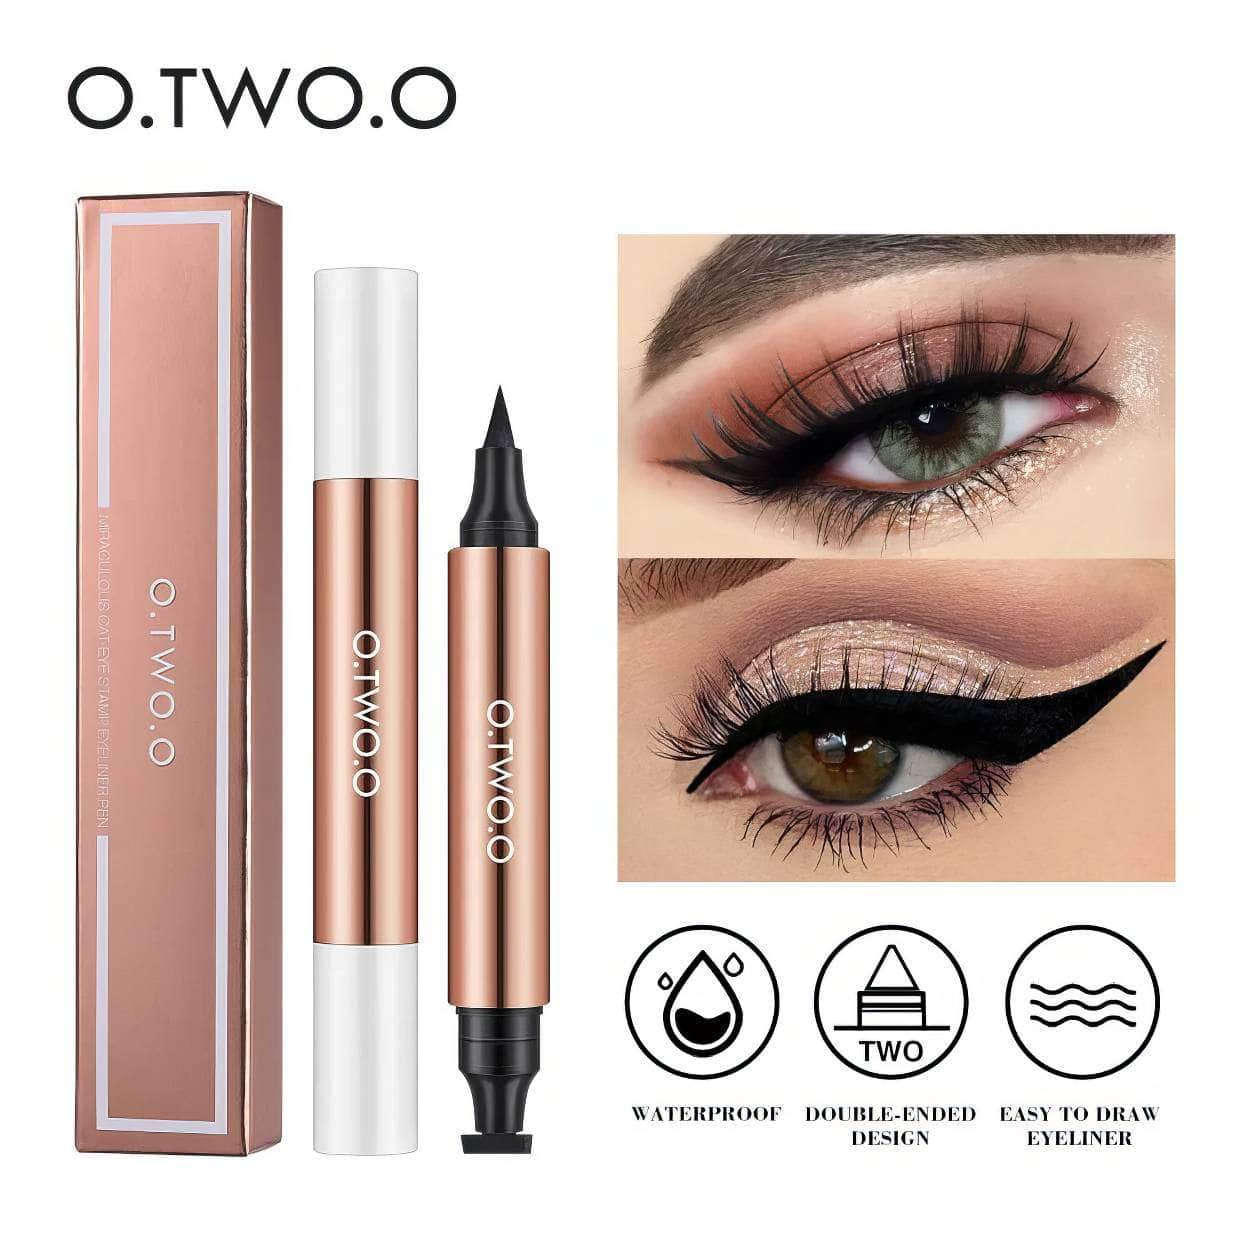 O.TWO.O Eyeliner Stamp: Black Liquid, Waterproof, Fast Dry, Double-ended Eye Liner Pen - Makeup for Women, Cosmetics